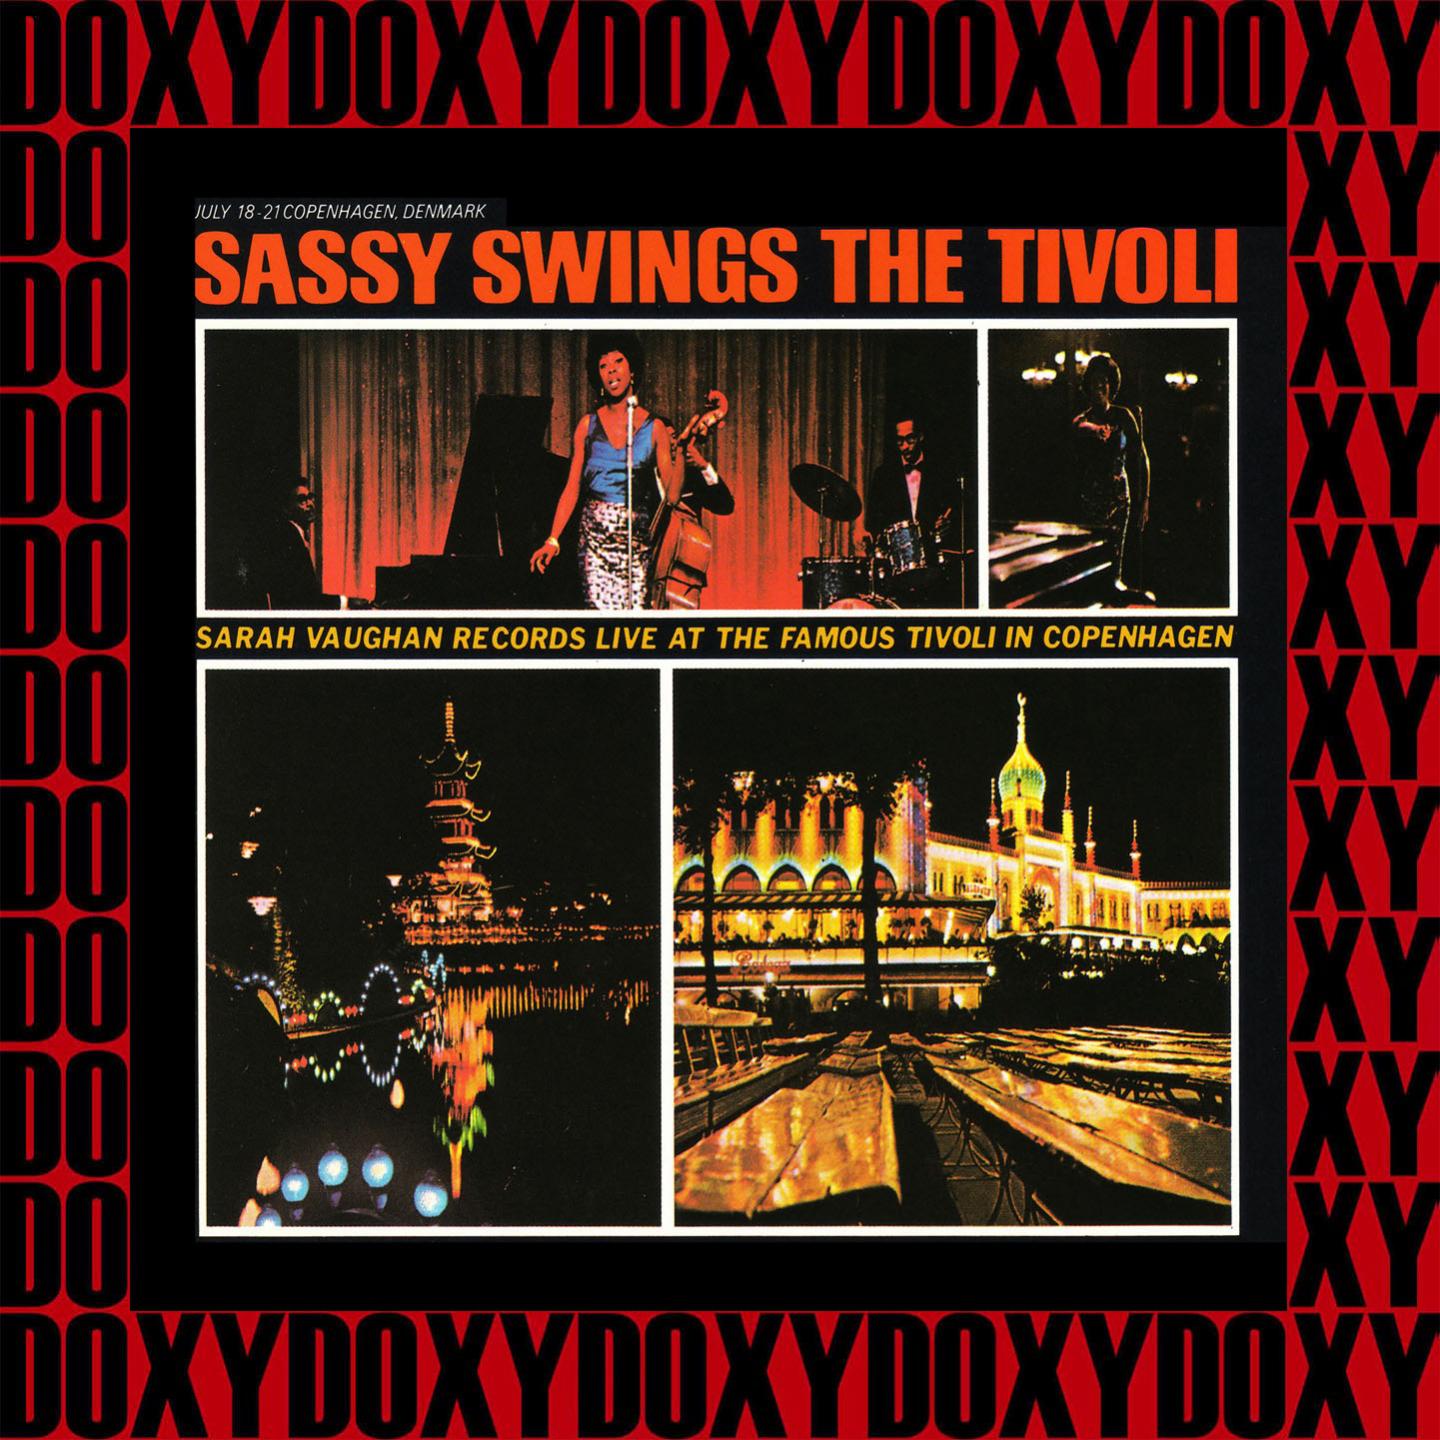 The Complete Recordings of Sassy Swings The Tivoli (Remastered Version) (Doxy Collection)